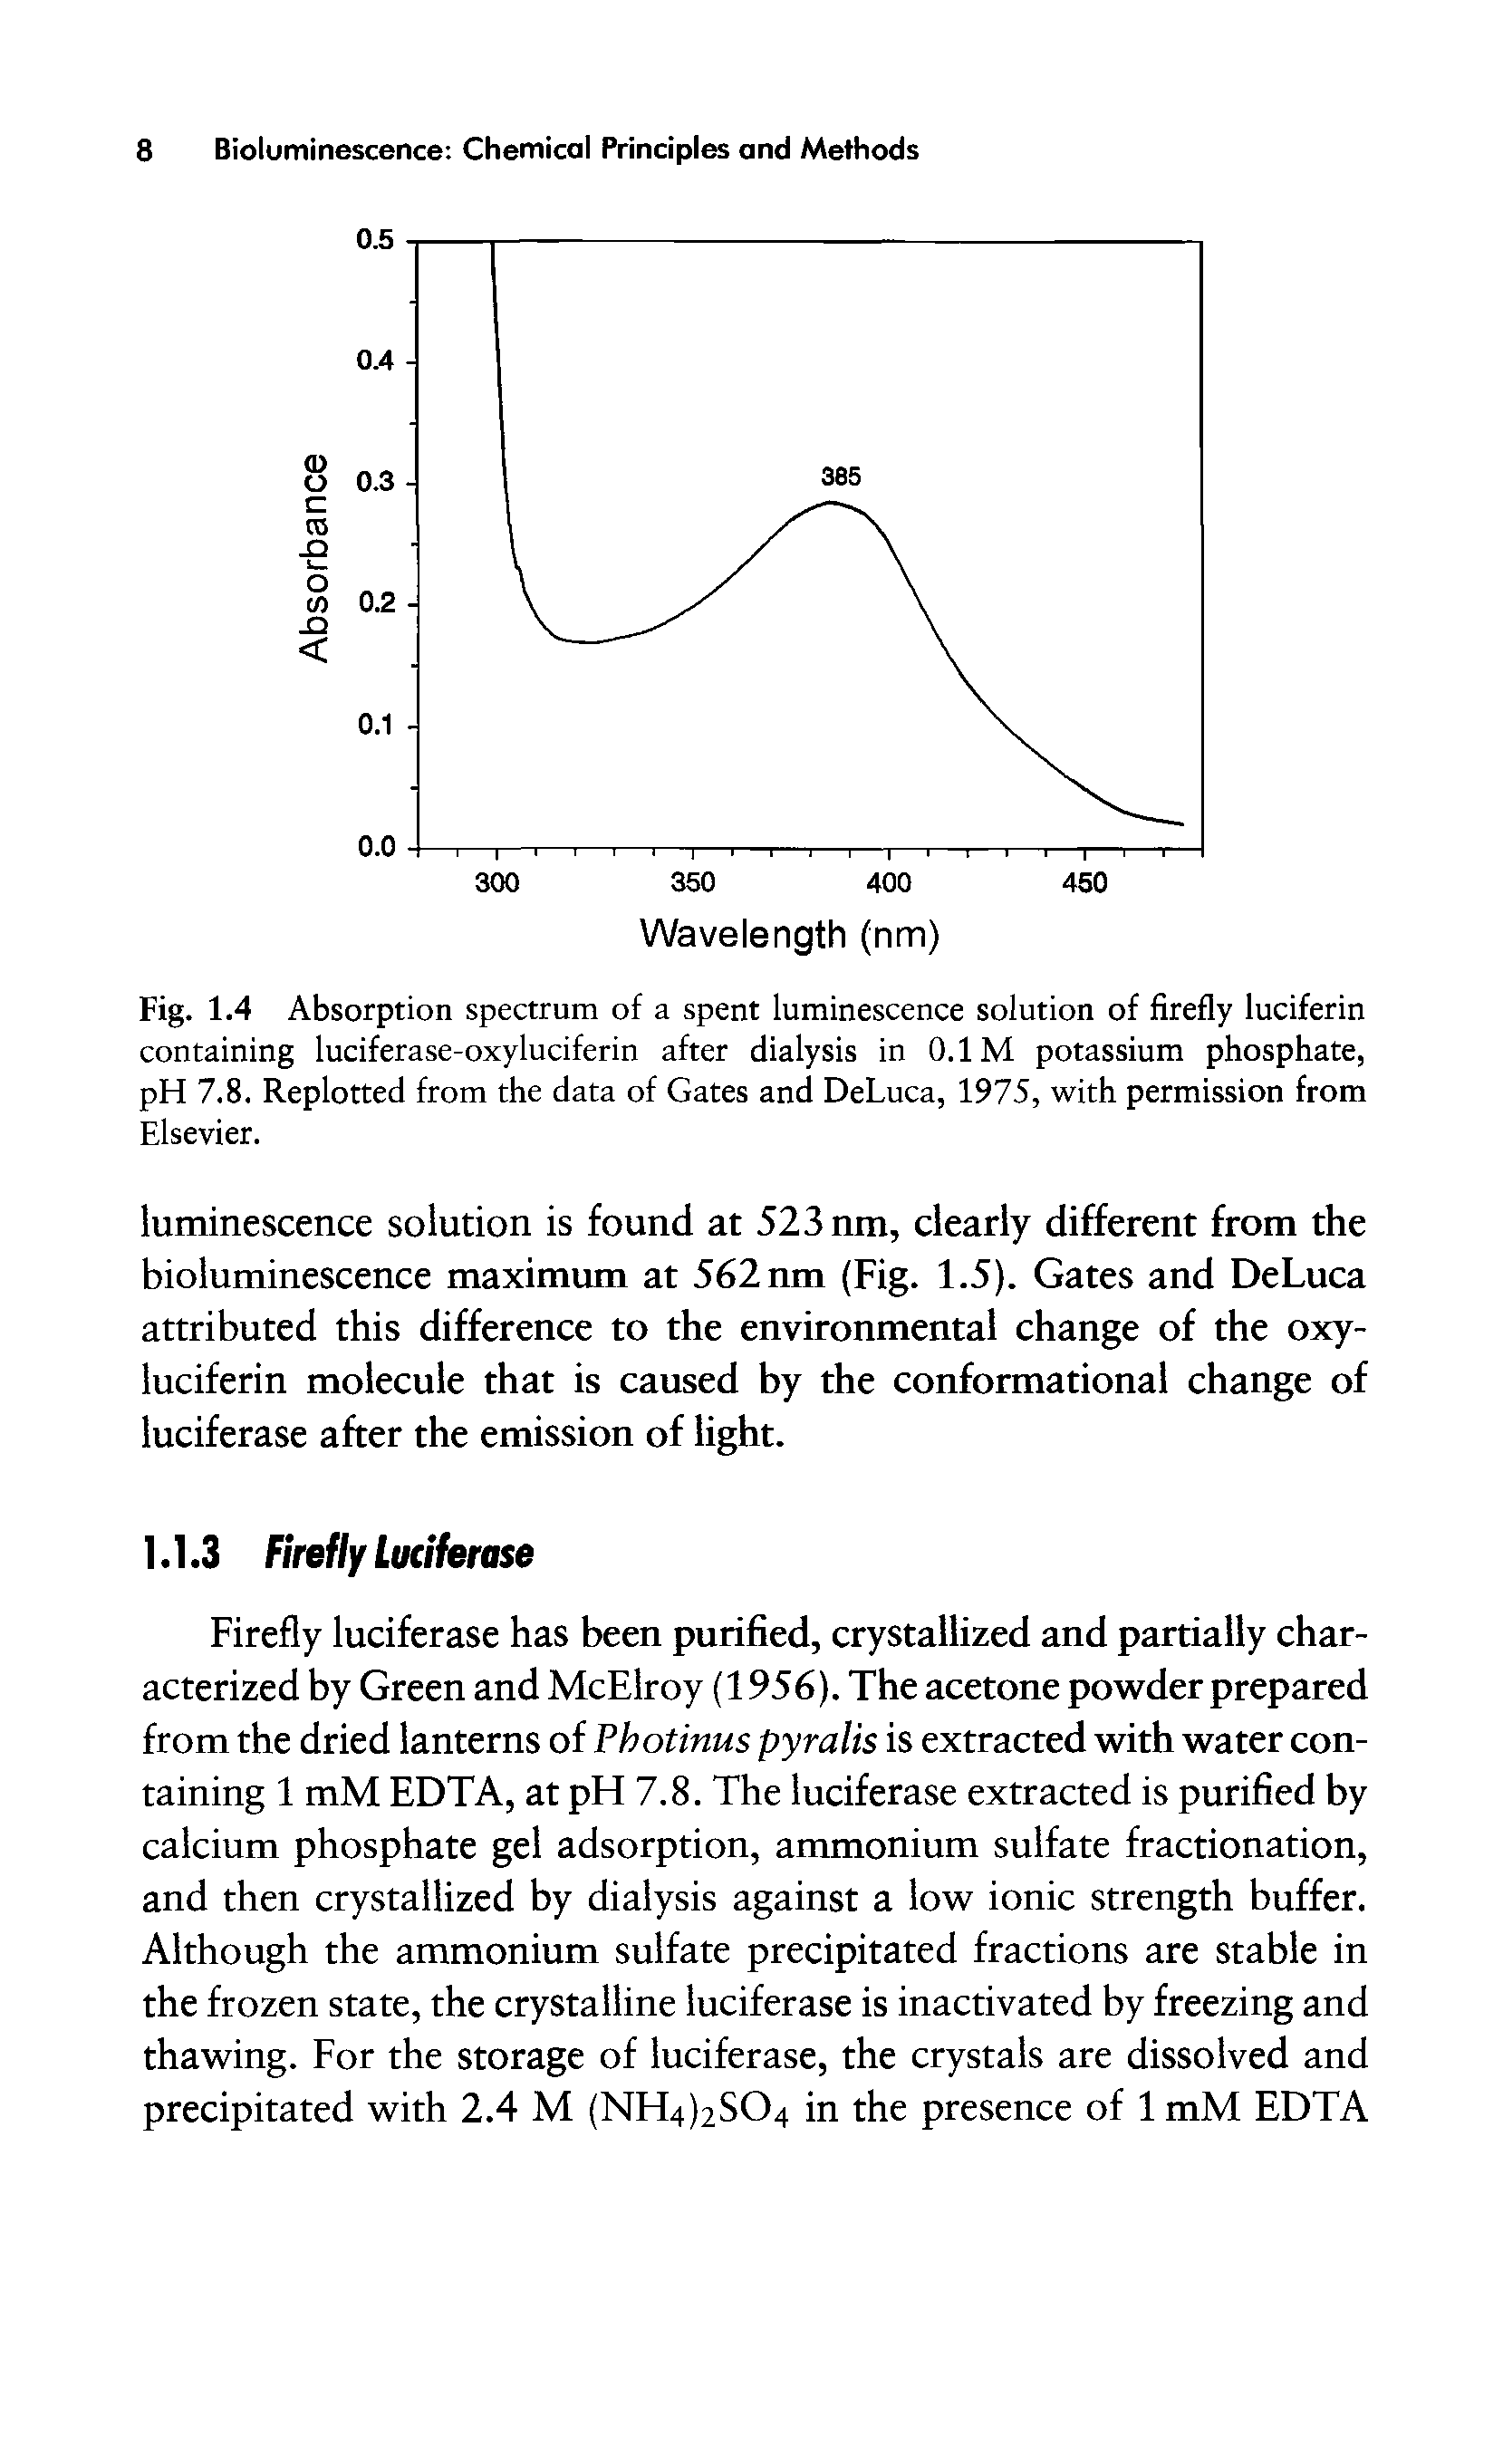 Fig. 1.4 Absorption spectrum of a spent luminescence solution of firefly luciferin containing luciferase-oxyluciferin after dialysis in 0.1 M potassium phosphate, pH 7.8. Replotted from the data of Gates and DeLuca, 1975, with permission from Elsevier.